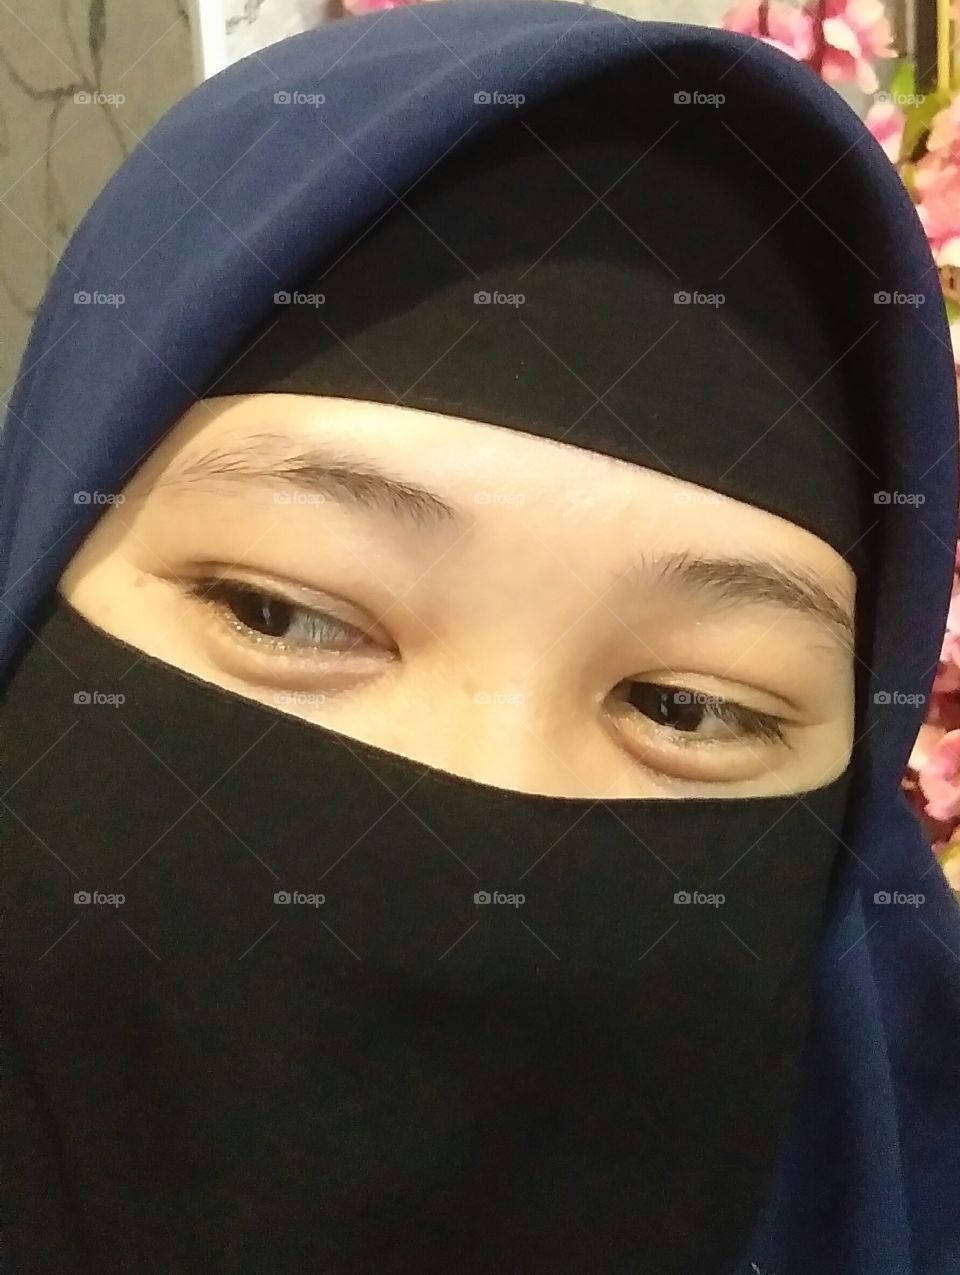 behind the shade of her beautiful eyes, there were many problems that were so heavy.
she is a Muslim girl who adheres to the Muslim dress (syar'ii)